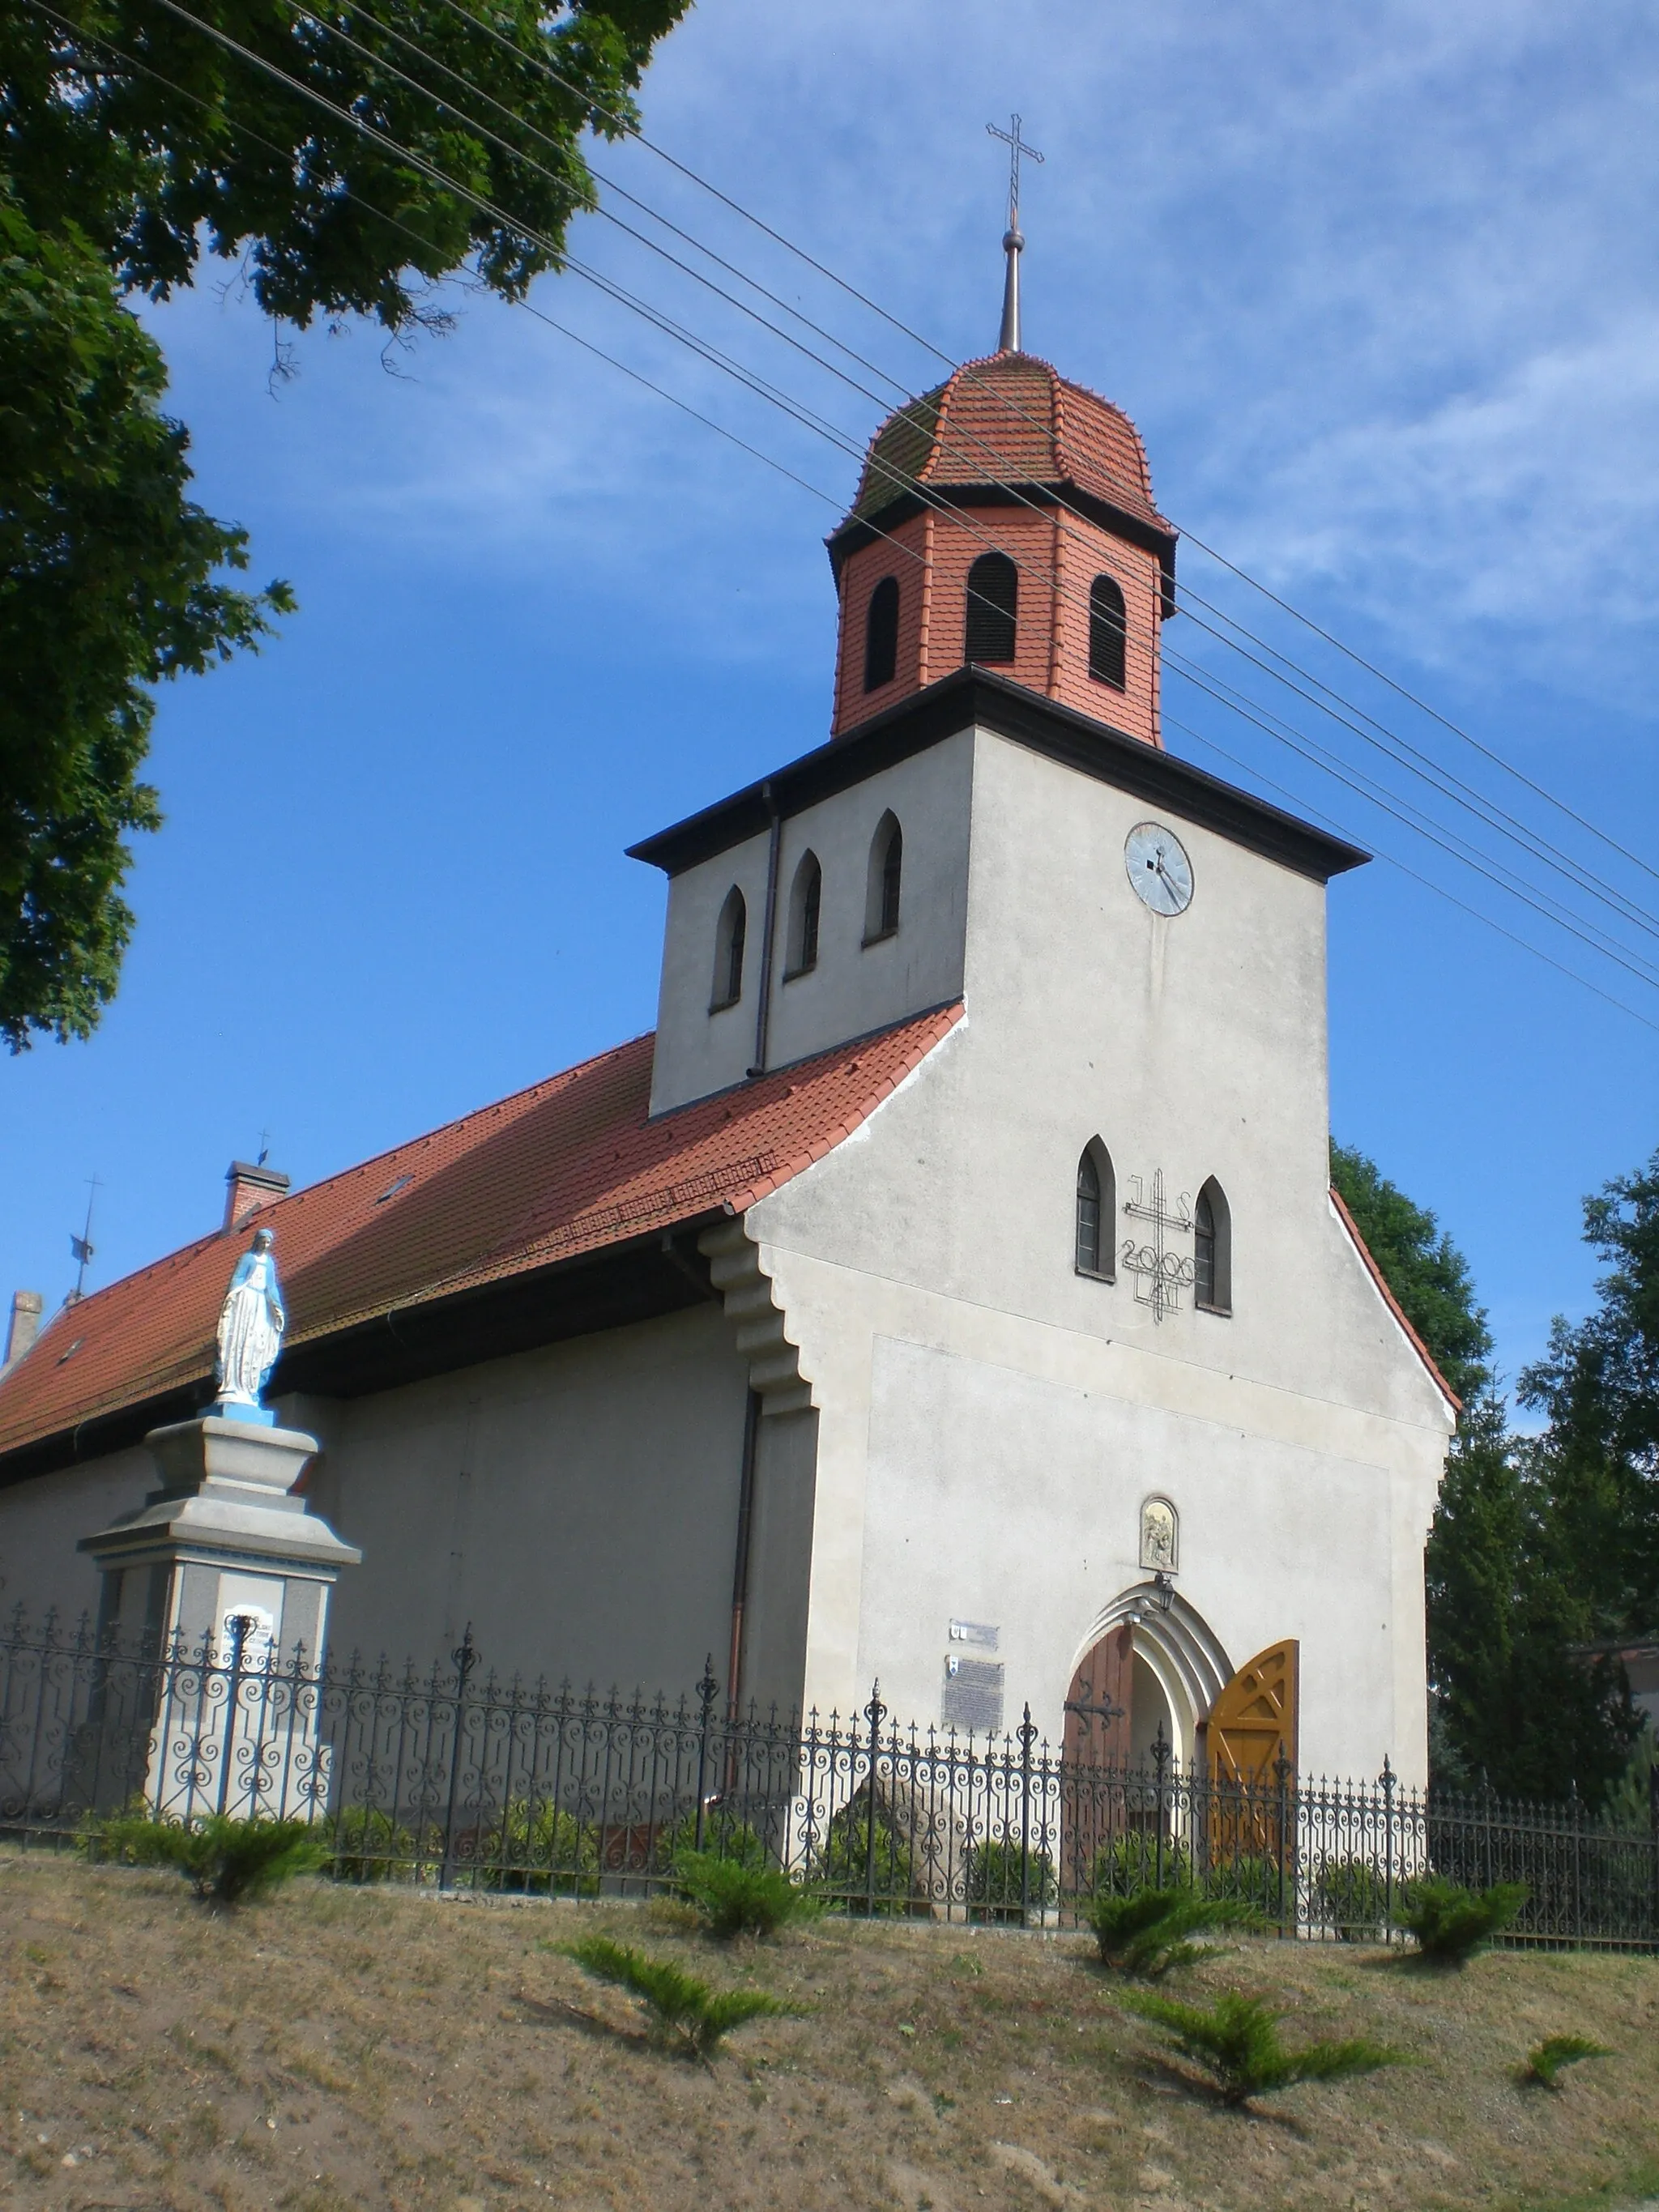 Photo showing: Our Lady of the Angels church in Obrzynowo, Poland